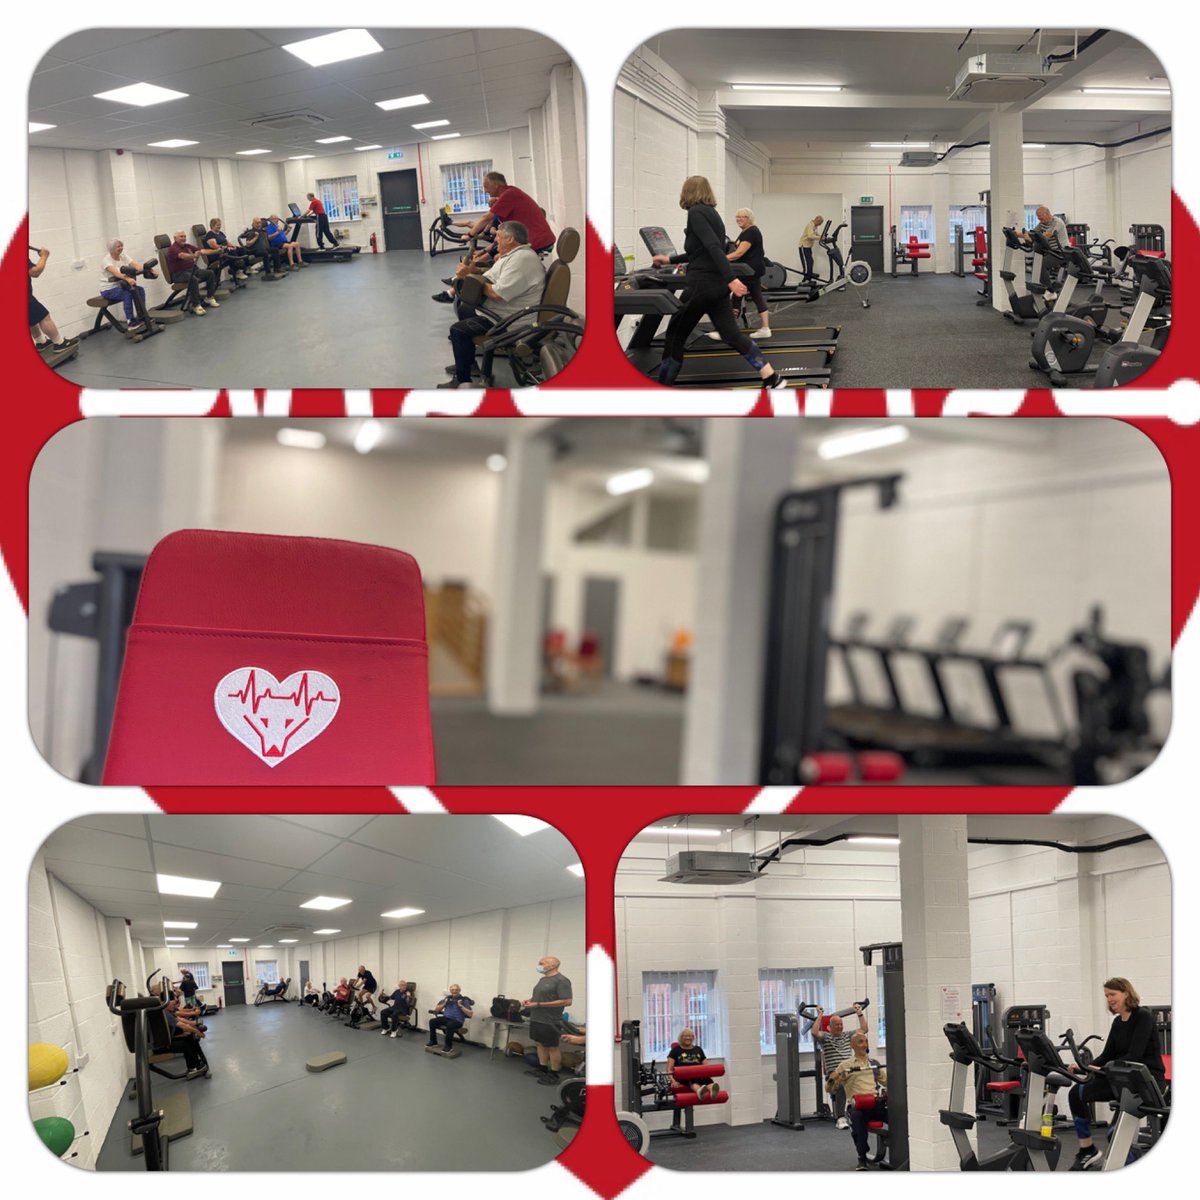 Week one completed, lots of happy members. Lovely to see how many of you have joined and appreciate the effort we have put into making this the best facility we can. This is only the beginning lots more to come from HAHW ❤️🐺@wcasg79 @RWTCardiacRehab @TheBHF @bacpr #wolvesaywe